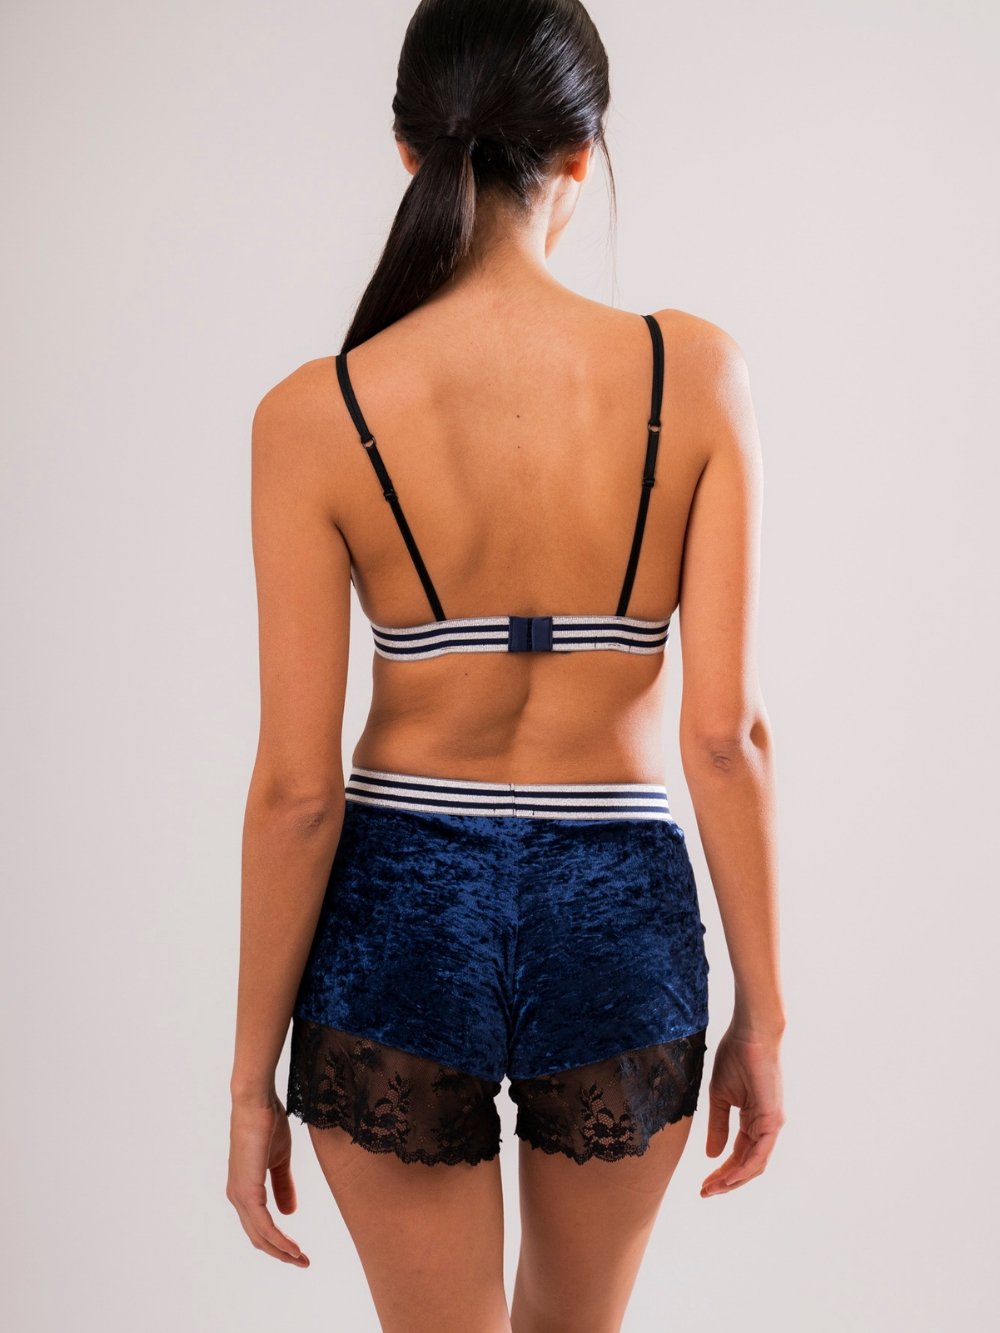 Shorts Velluto Blu - Carami - Caramì Lingerie & Activewear Made in Italy